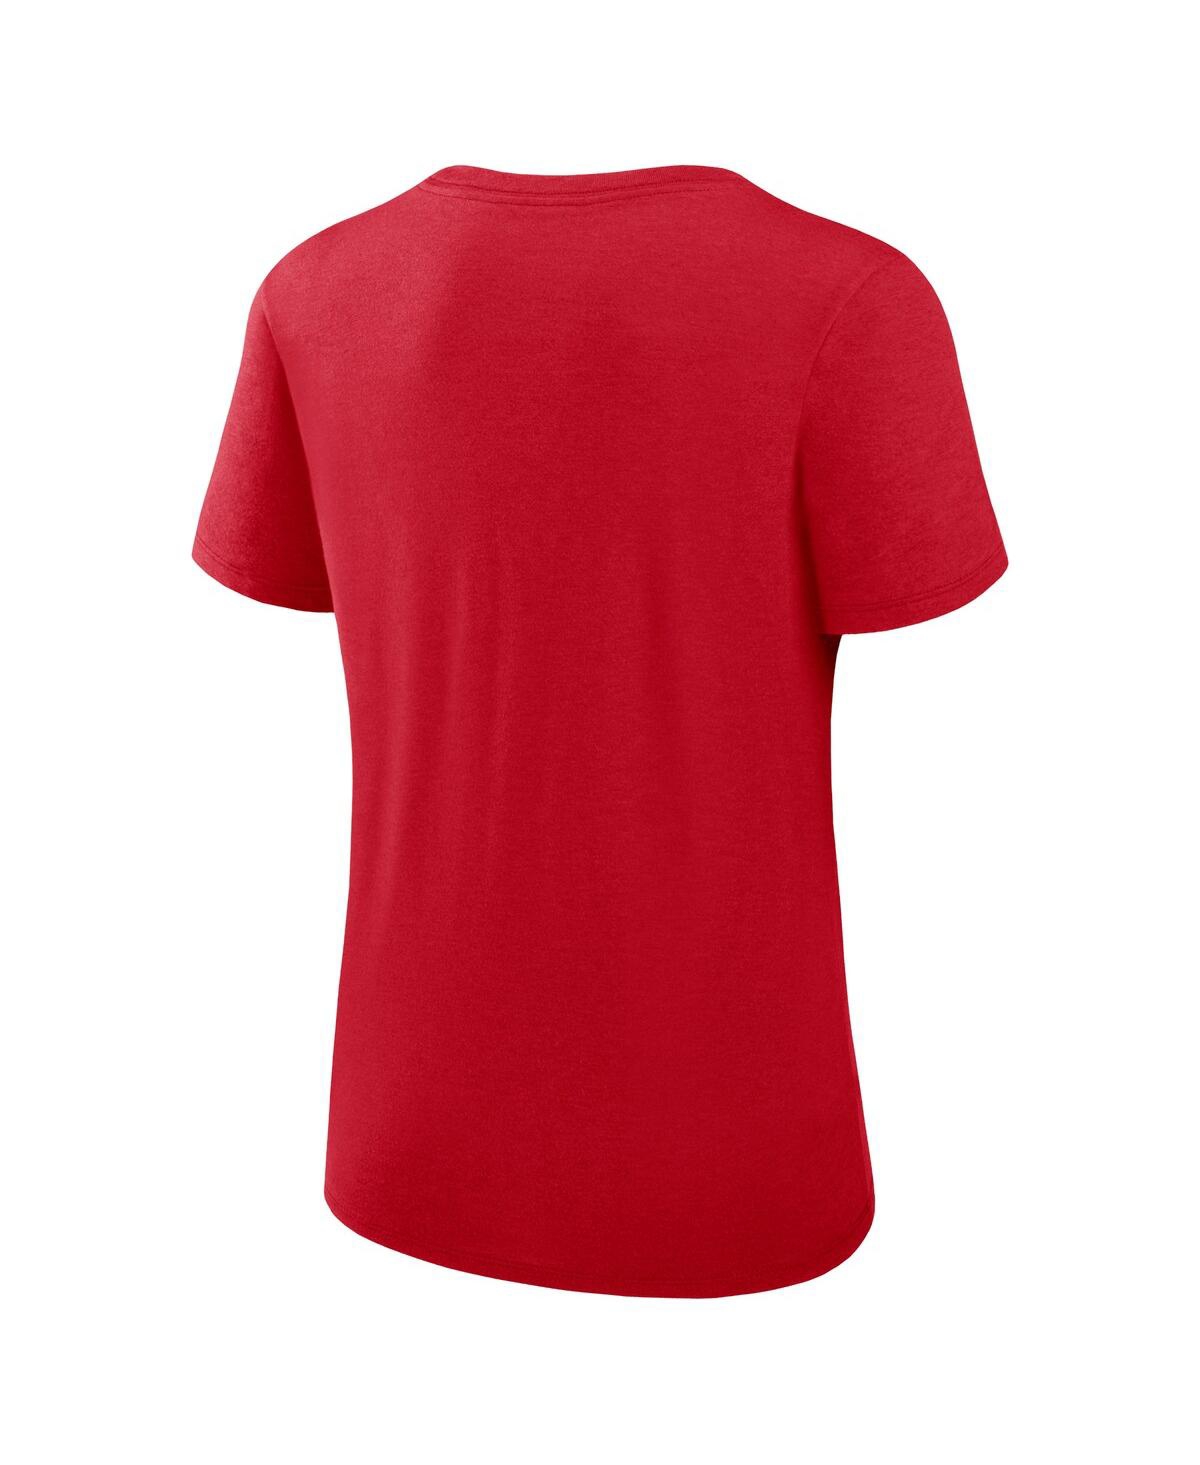 Shop Nike Women's  Red Philadelphia Phillies Authentic Collection Performance Scoop Neck T-shirt